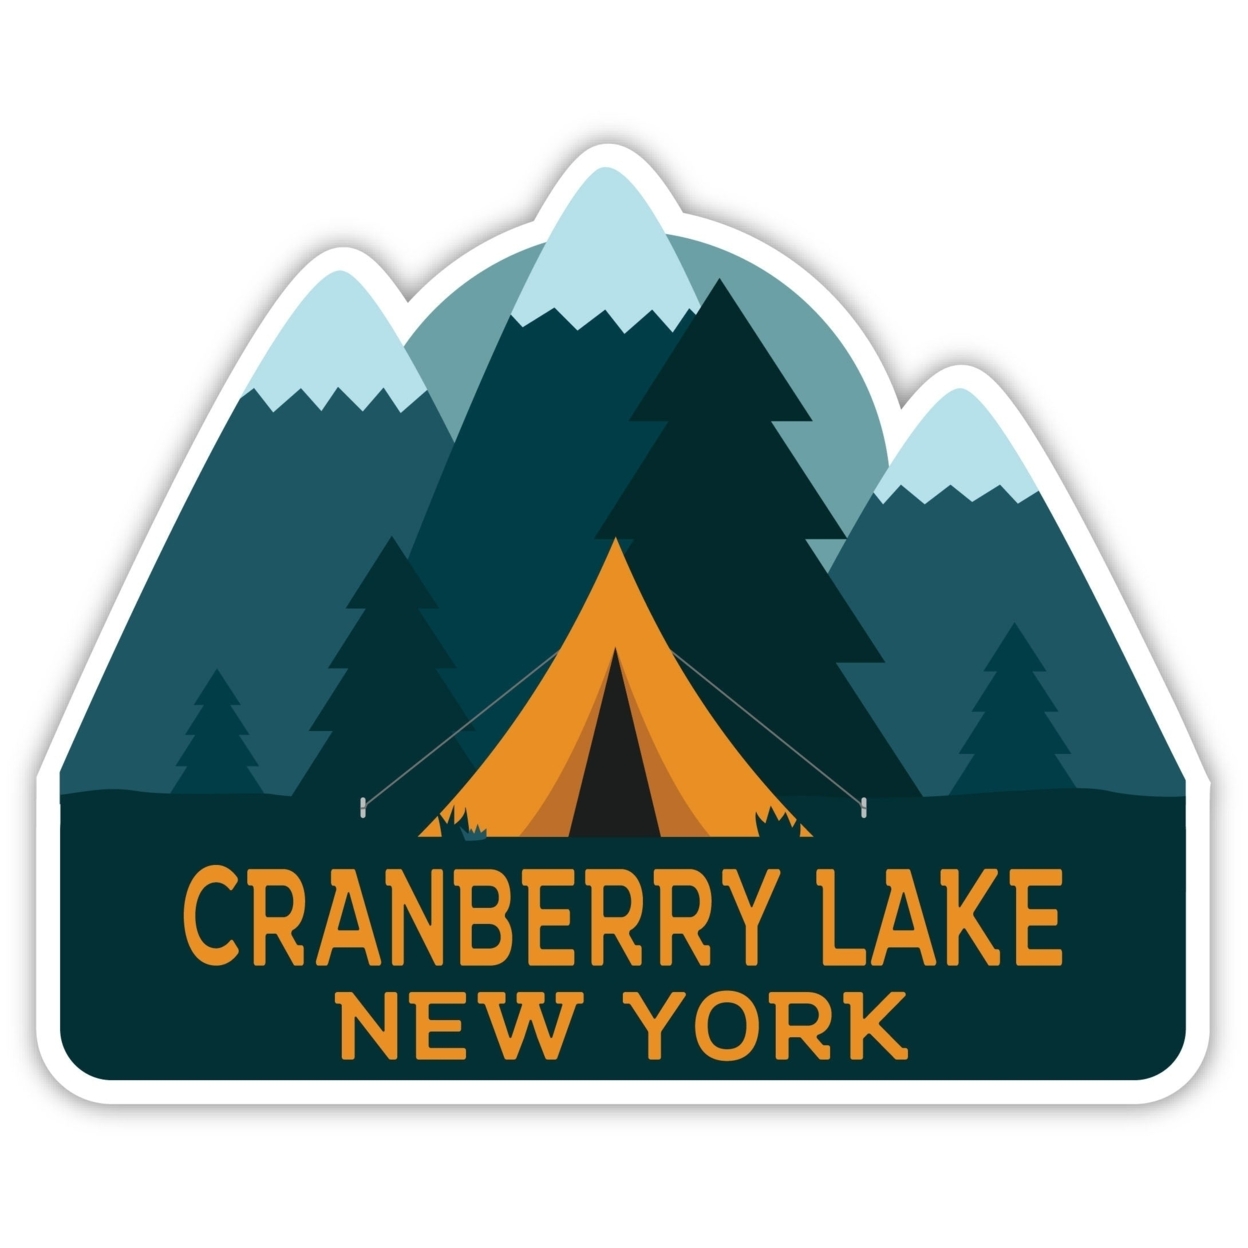 Cranberry Lake New York Souvenir Decorative Stickers (Choose Theme And Size) - 4-Pack, 8-Inch, Adventures Awaits